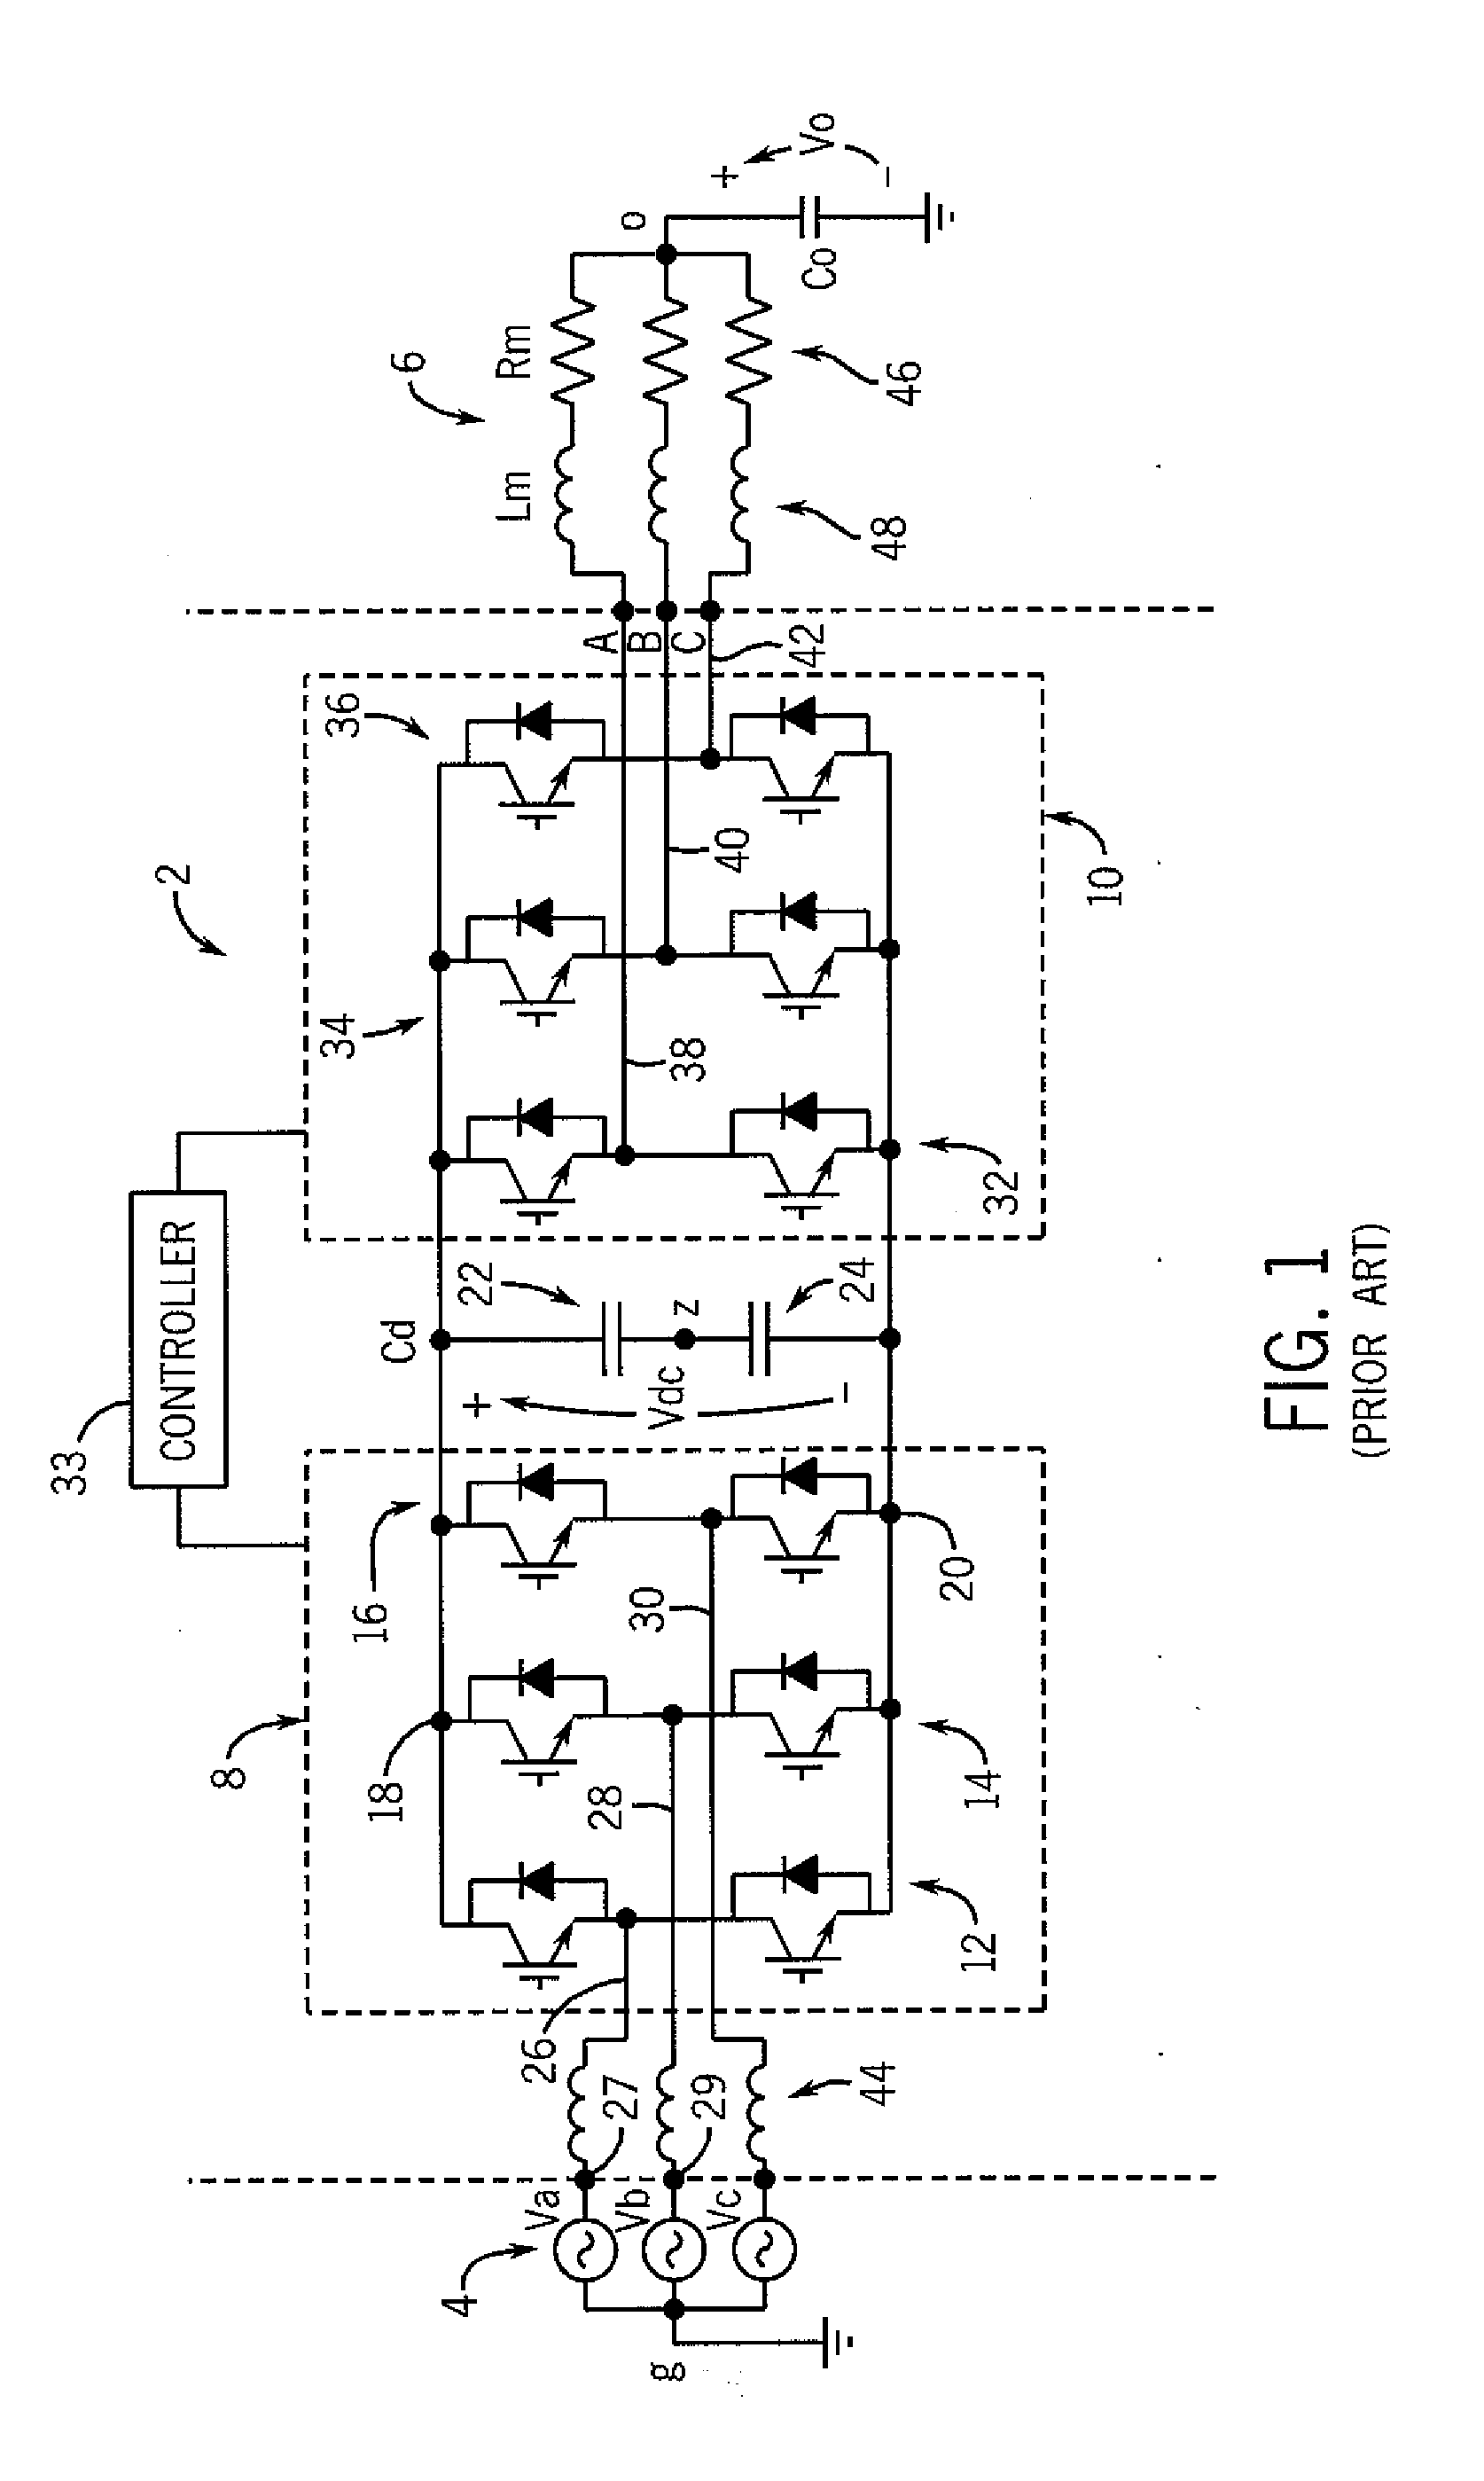 Power converter with reduced common mode voltage